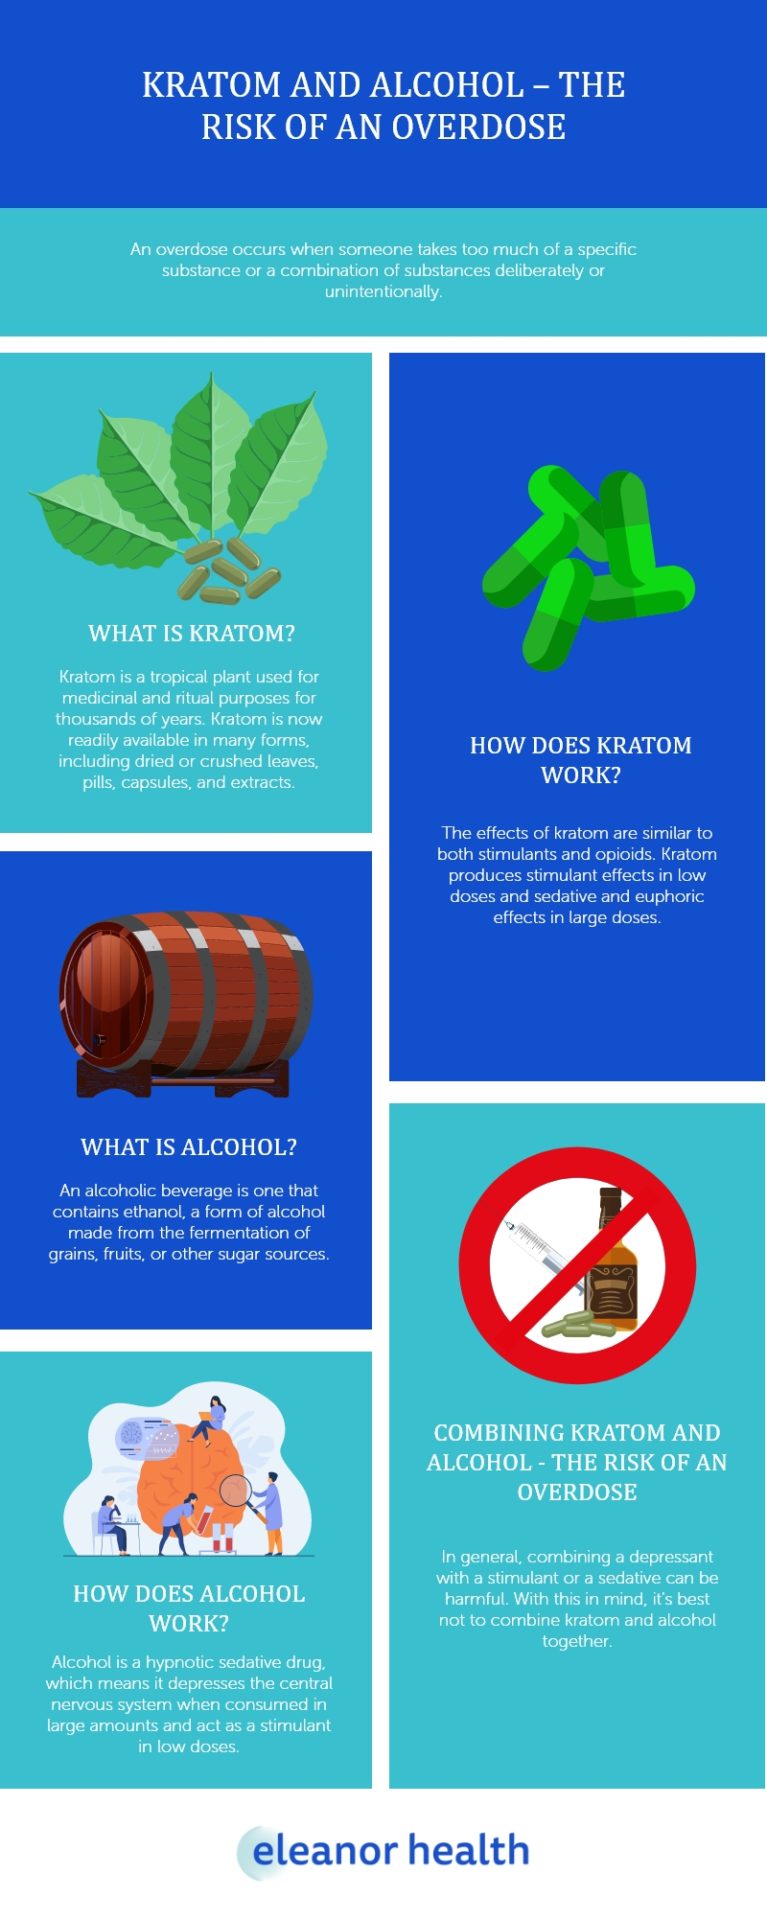 Kratom and Alcohol – The Risk of an Overdose